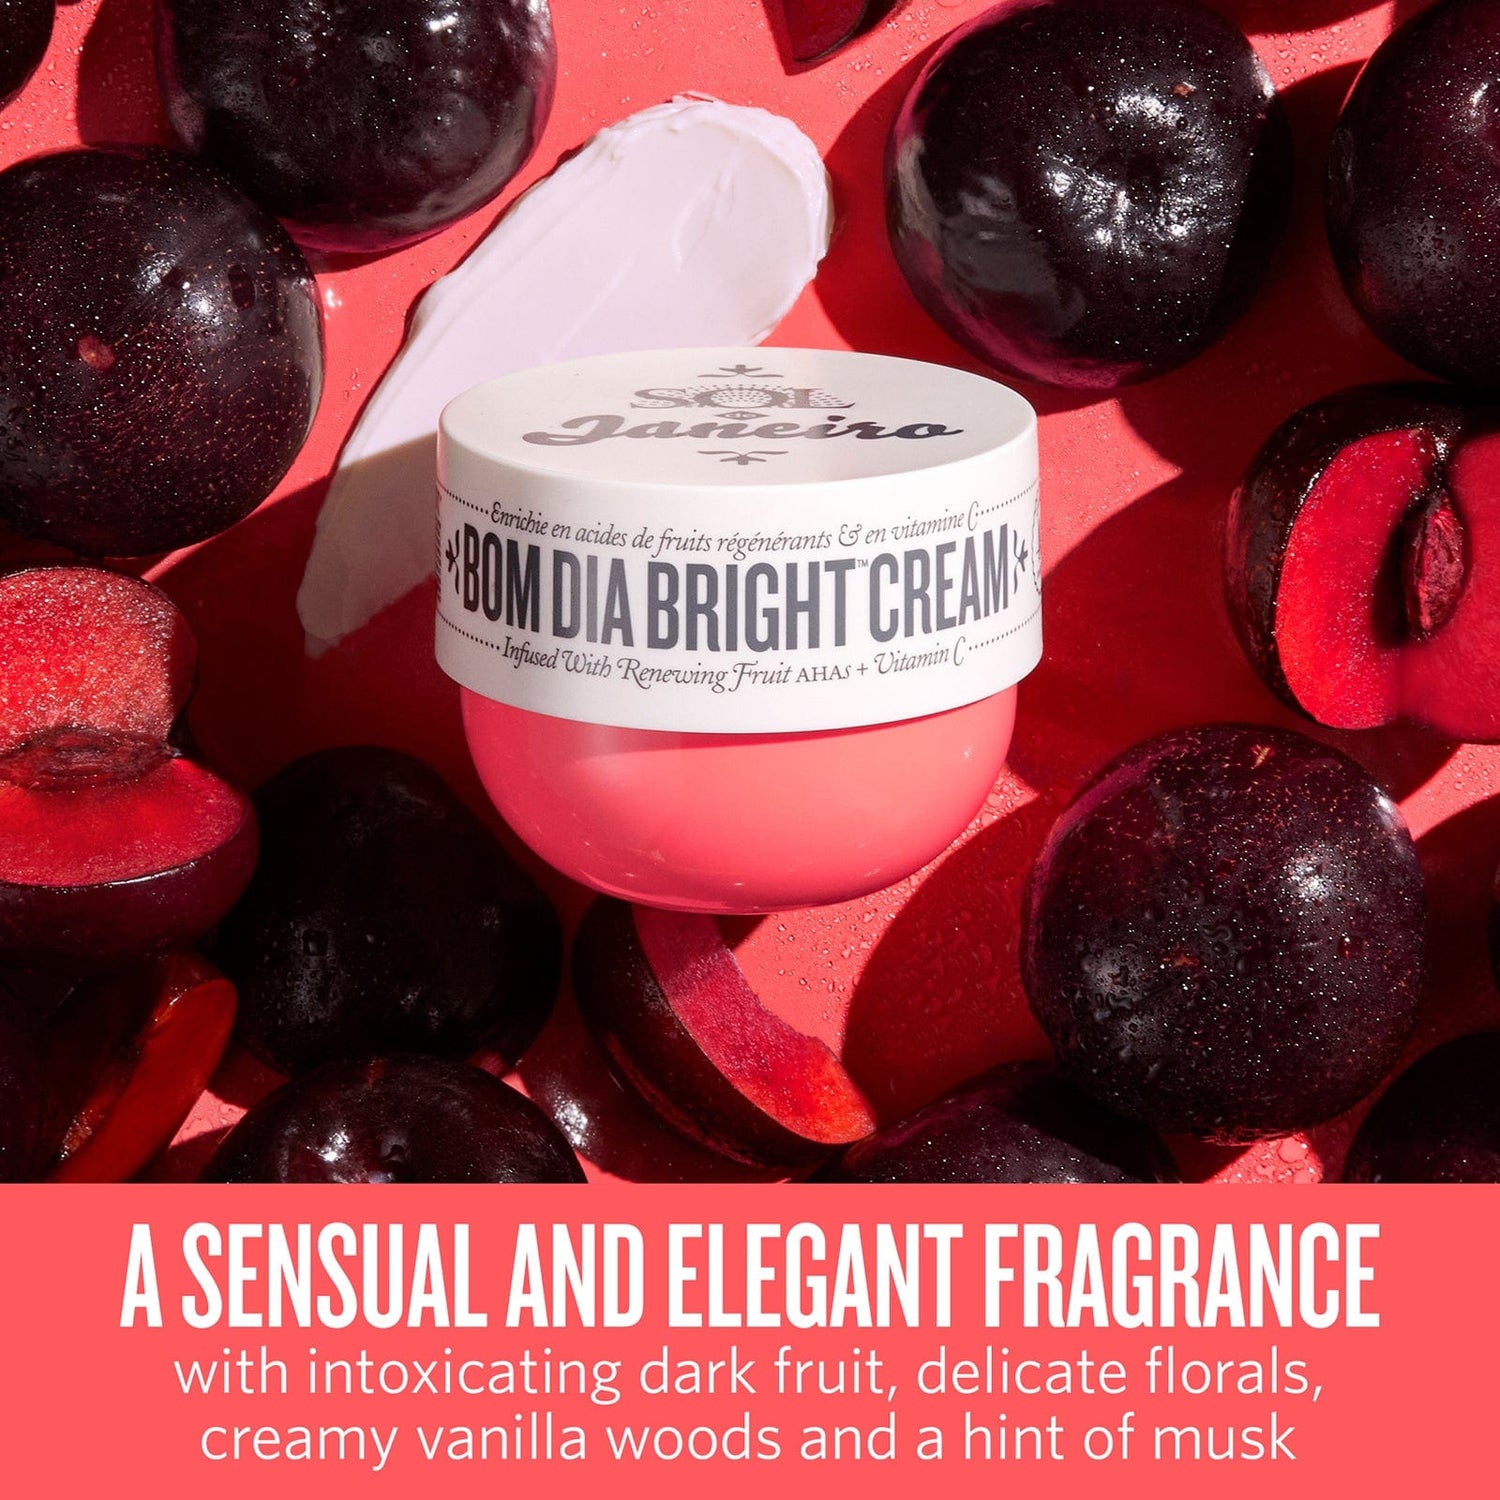 A sensual and elegant fragrance with intoxicating dark fruit, delicate florals, creamy vanilla woods and a hint of musk 